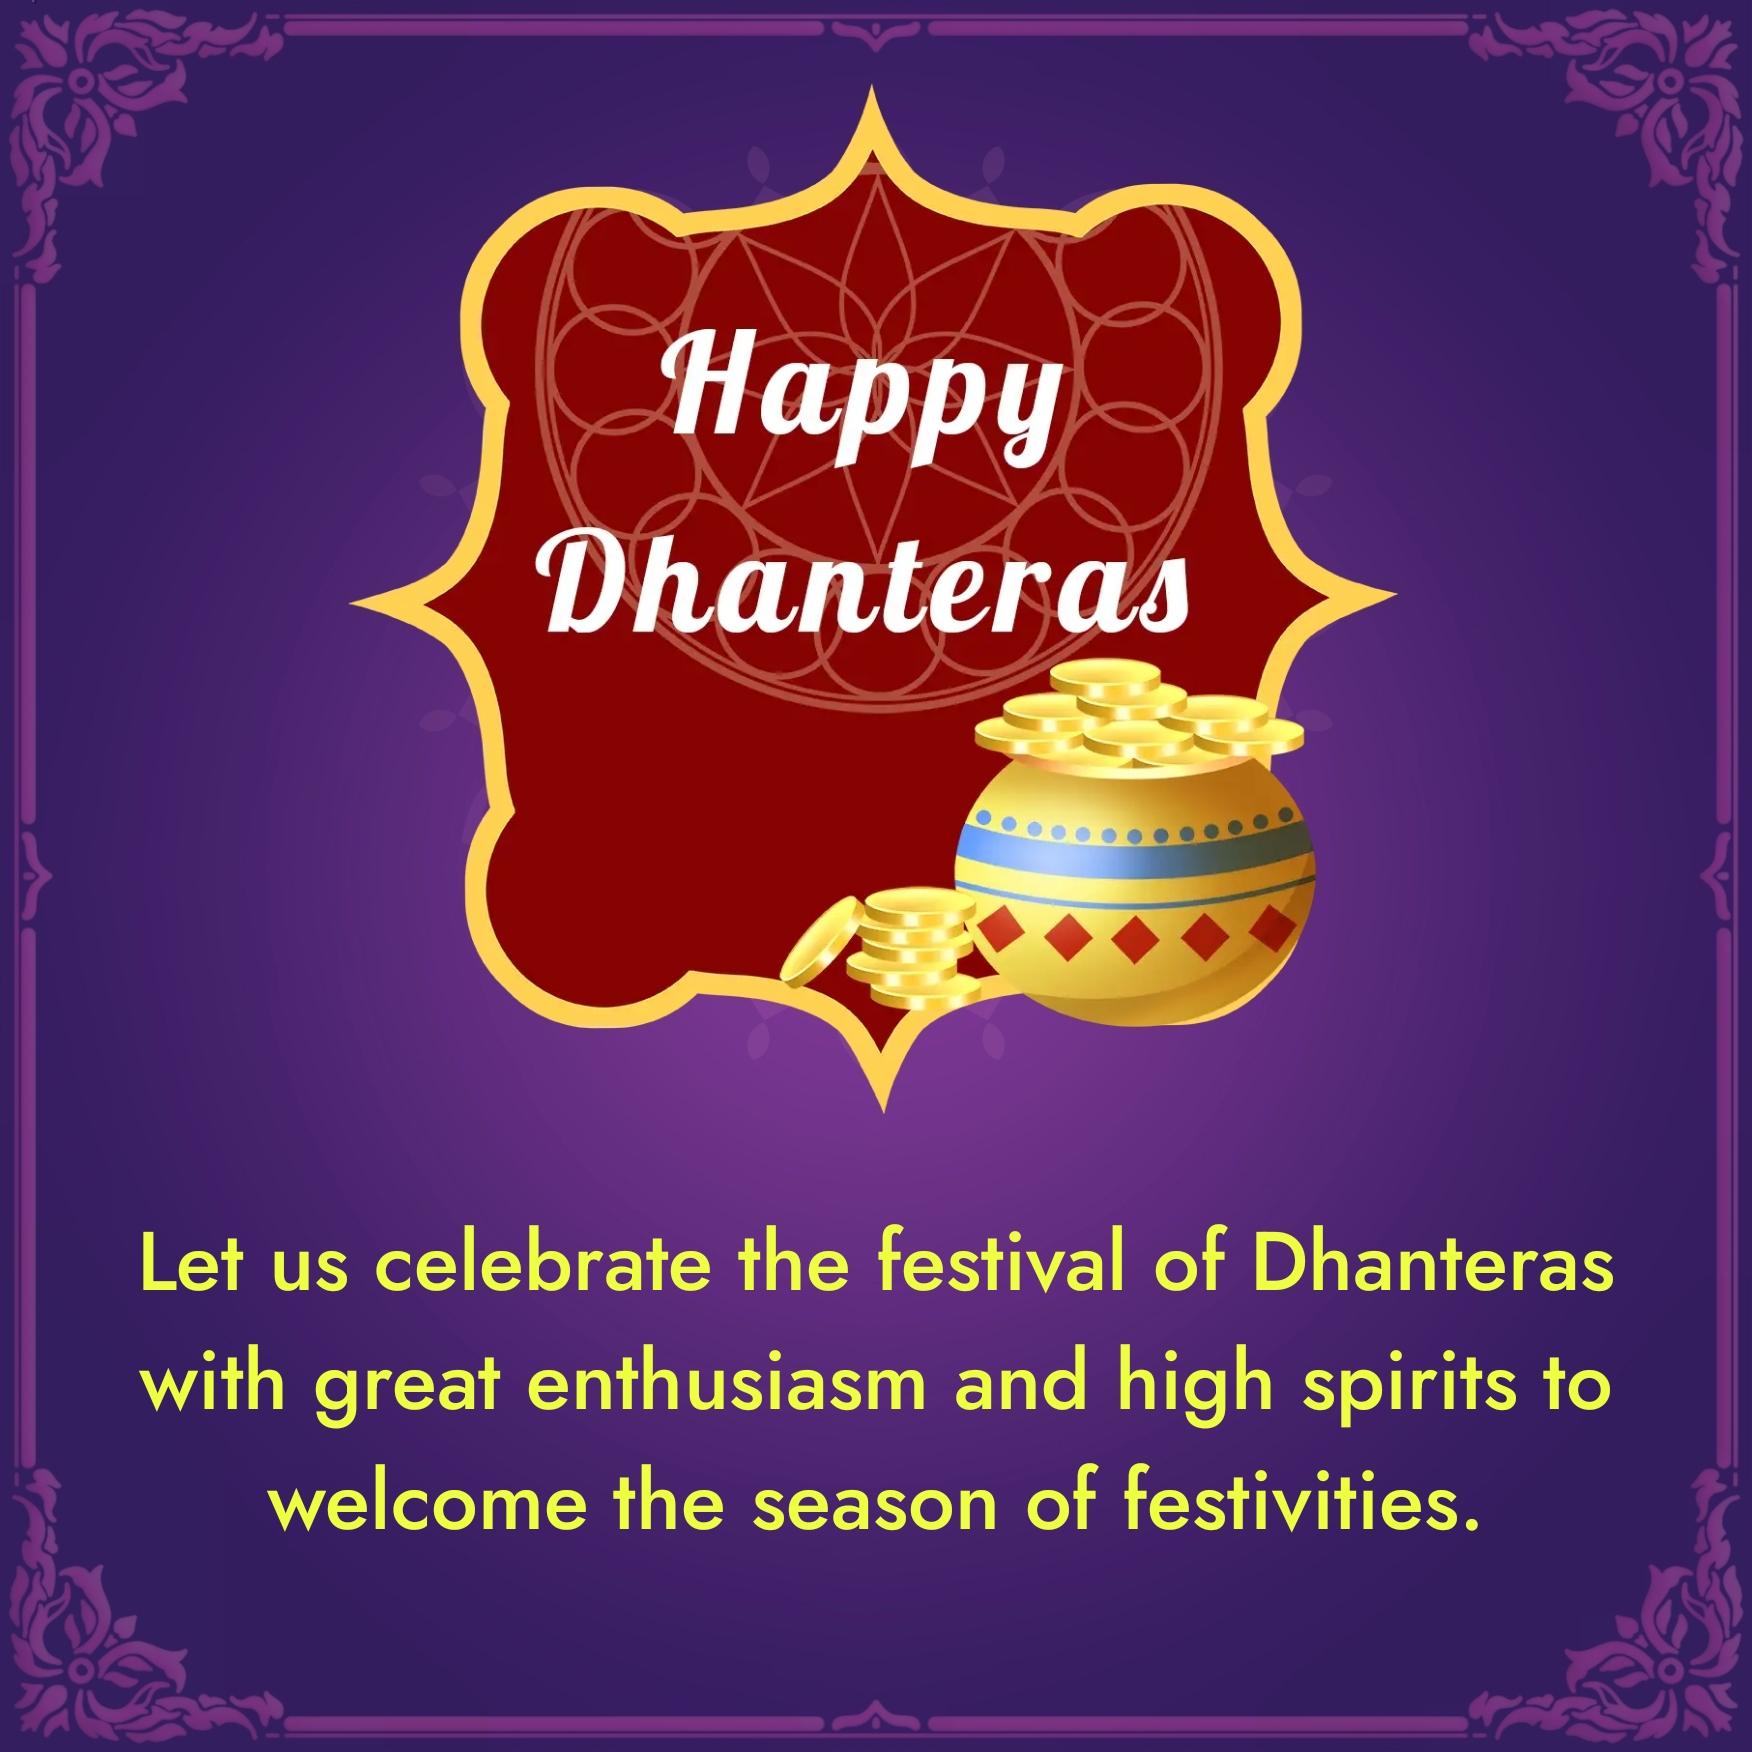 Let us celebrate the festival of Dhanteras with great enthusiasm